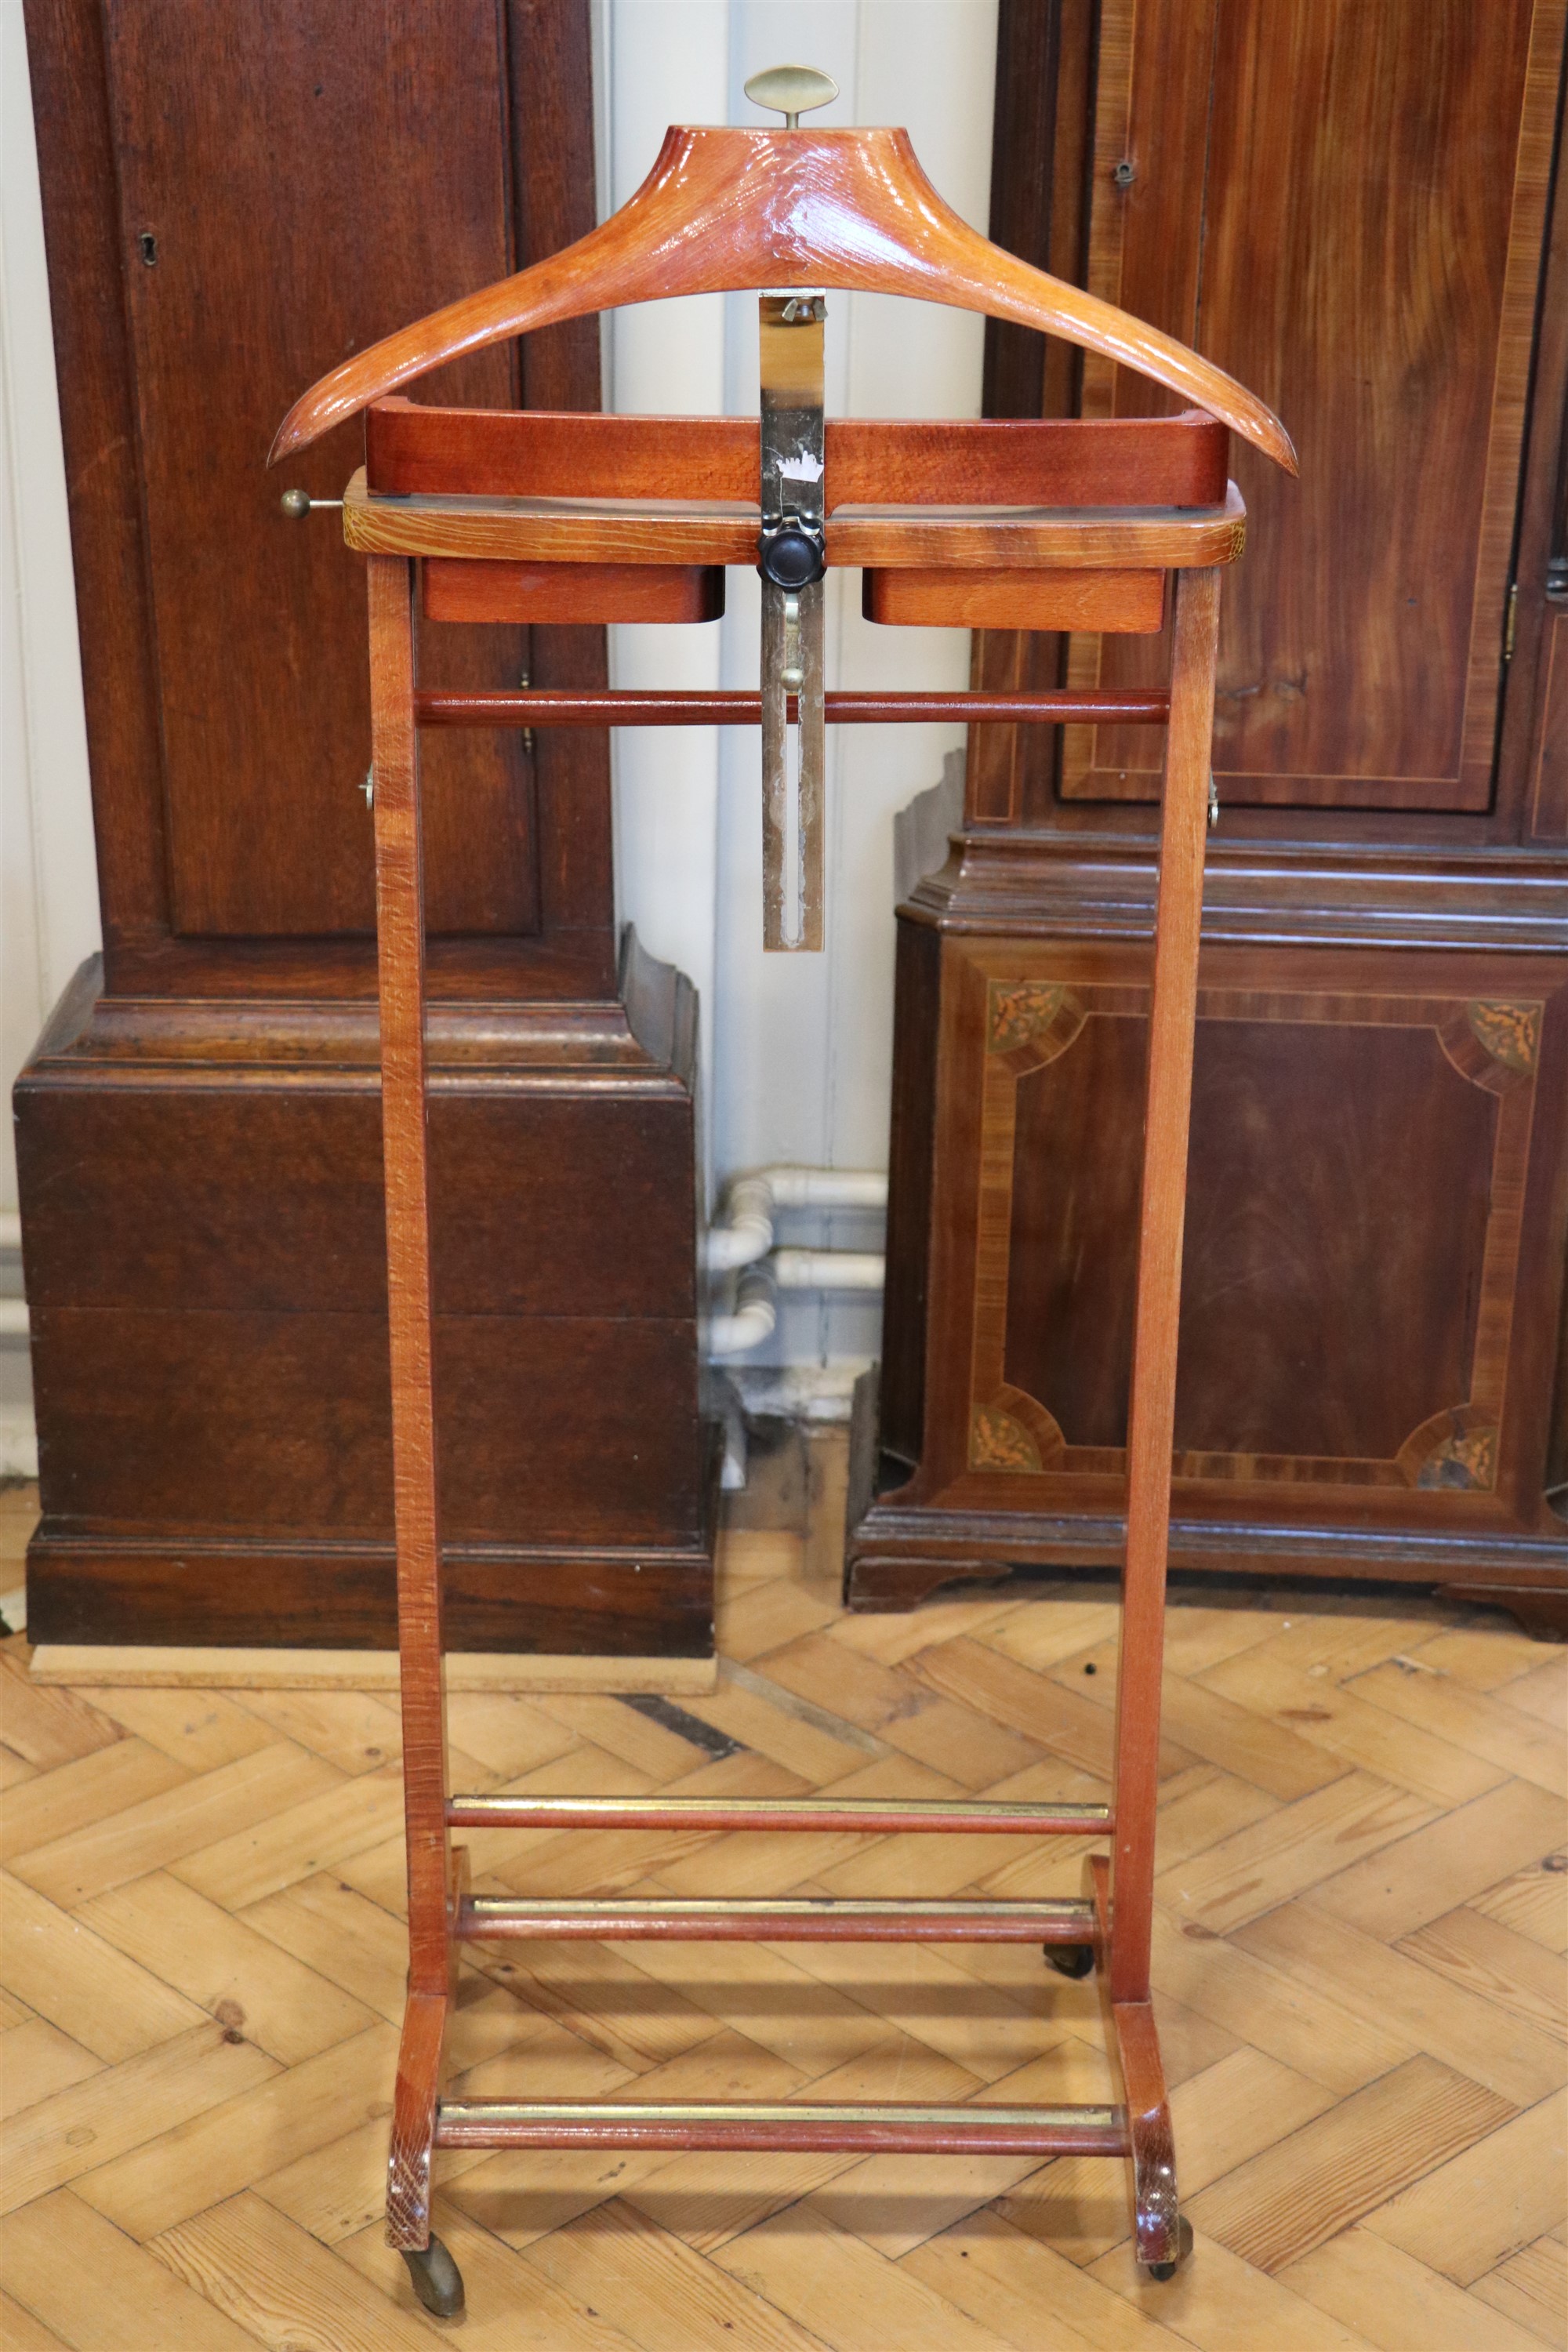 An Italian gentleman's brass mounted timber clothes valet stand, by FR Italy, circa 1960s - Image 2 of 4